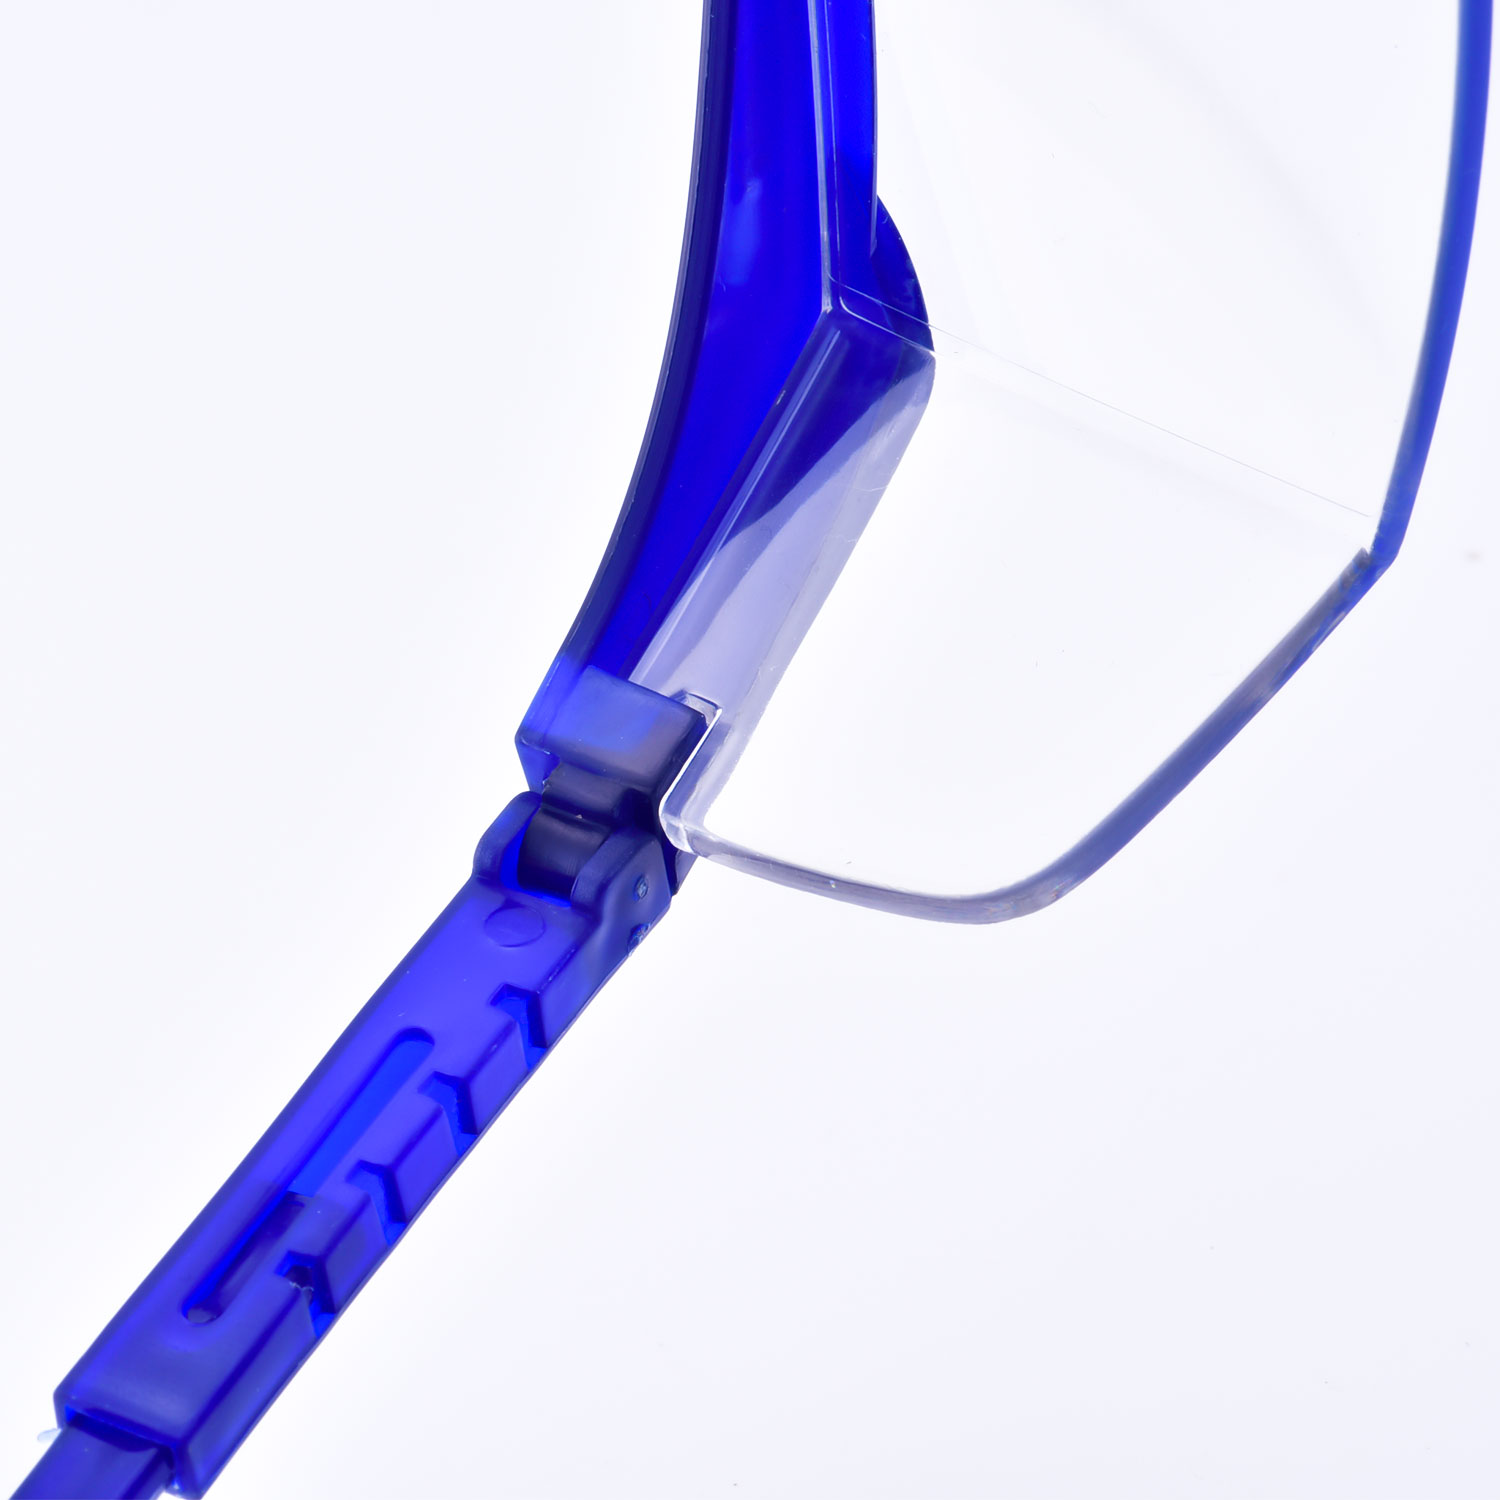 High Quality Safety Glasses Clear KS102 Blue